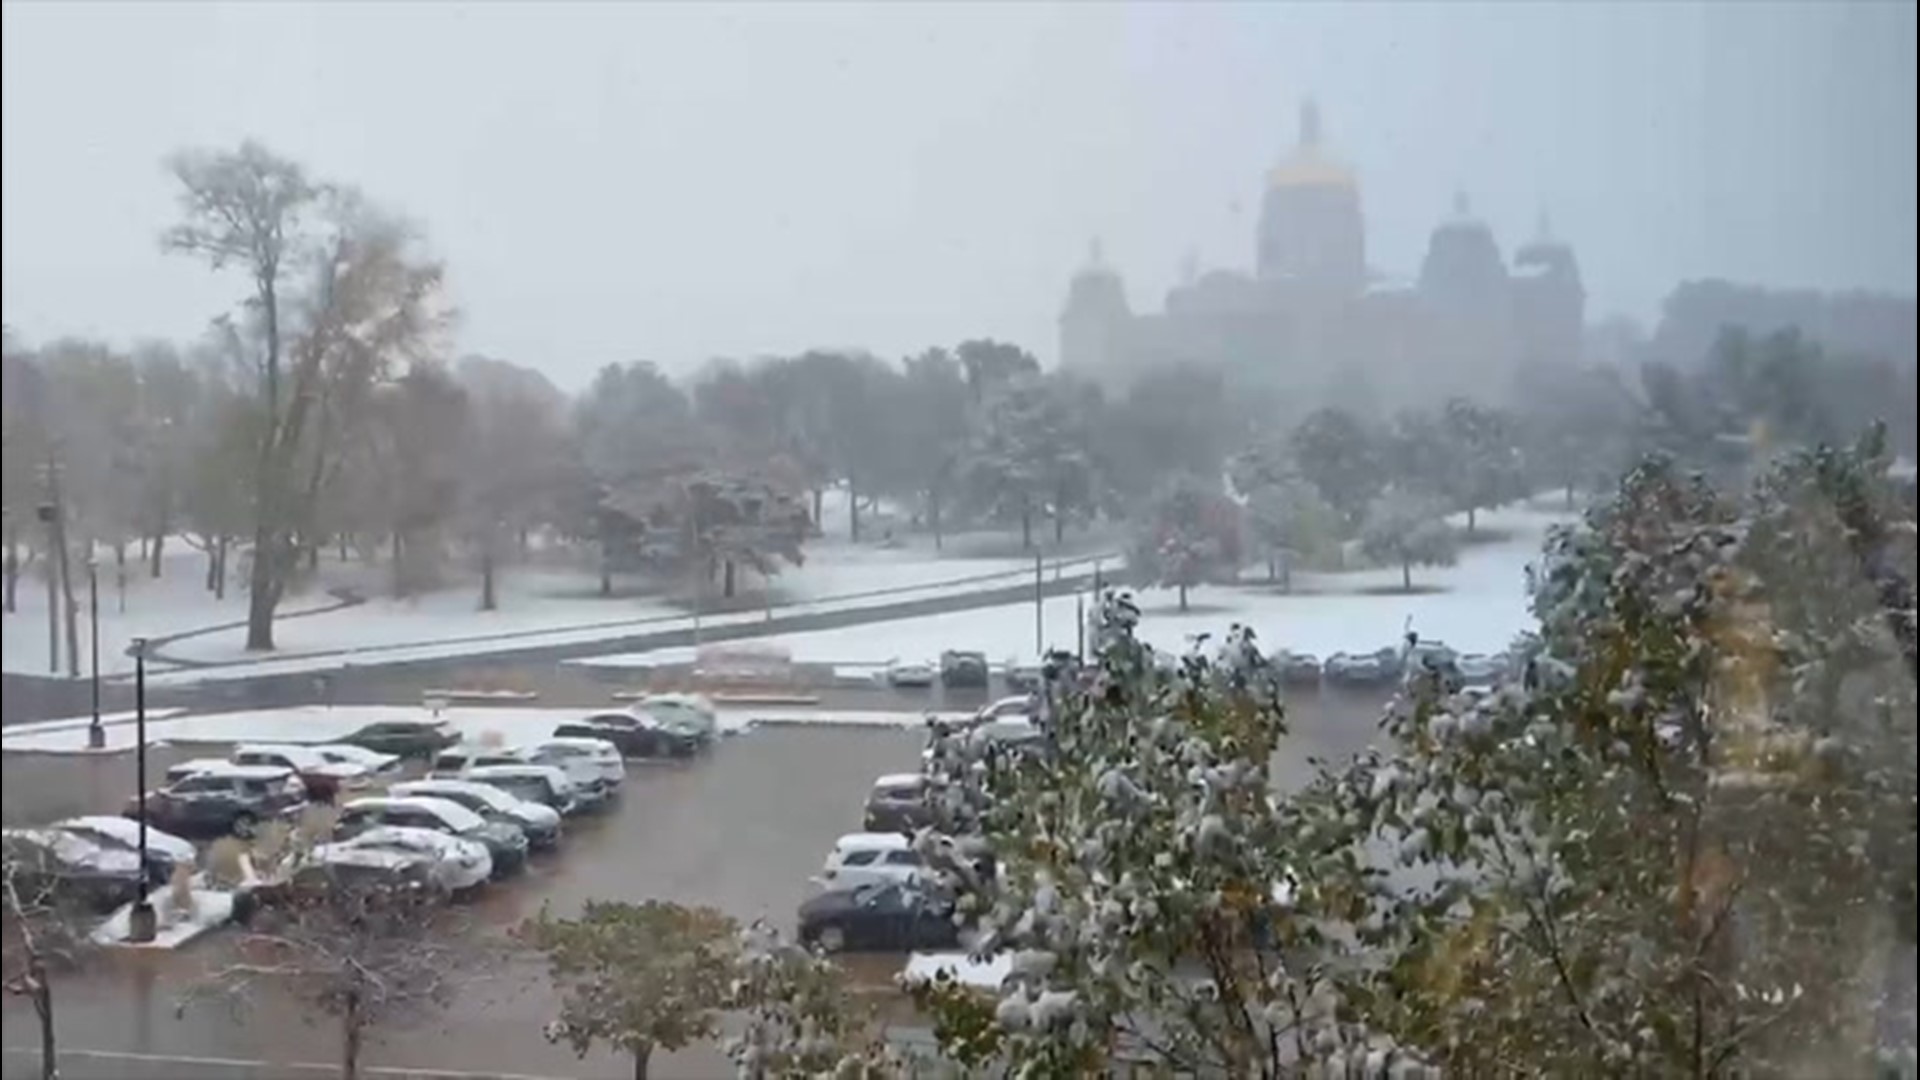 Residents in Des Moines, Iowa, weren't quite ready for the snow already on Oct. 19.